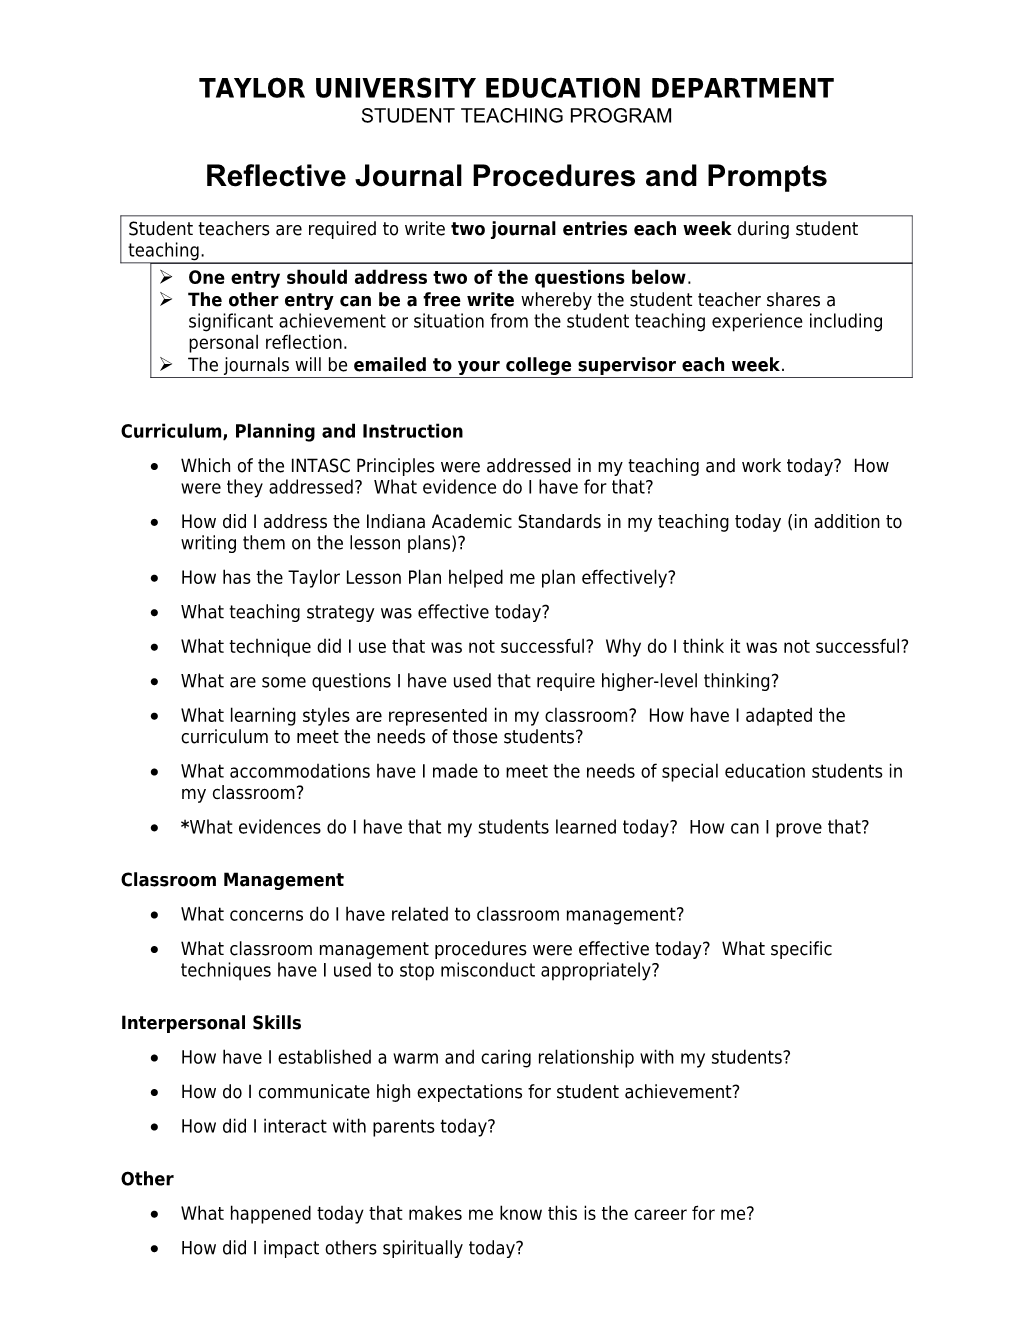 Questions for Student Teaching Journal Entries